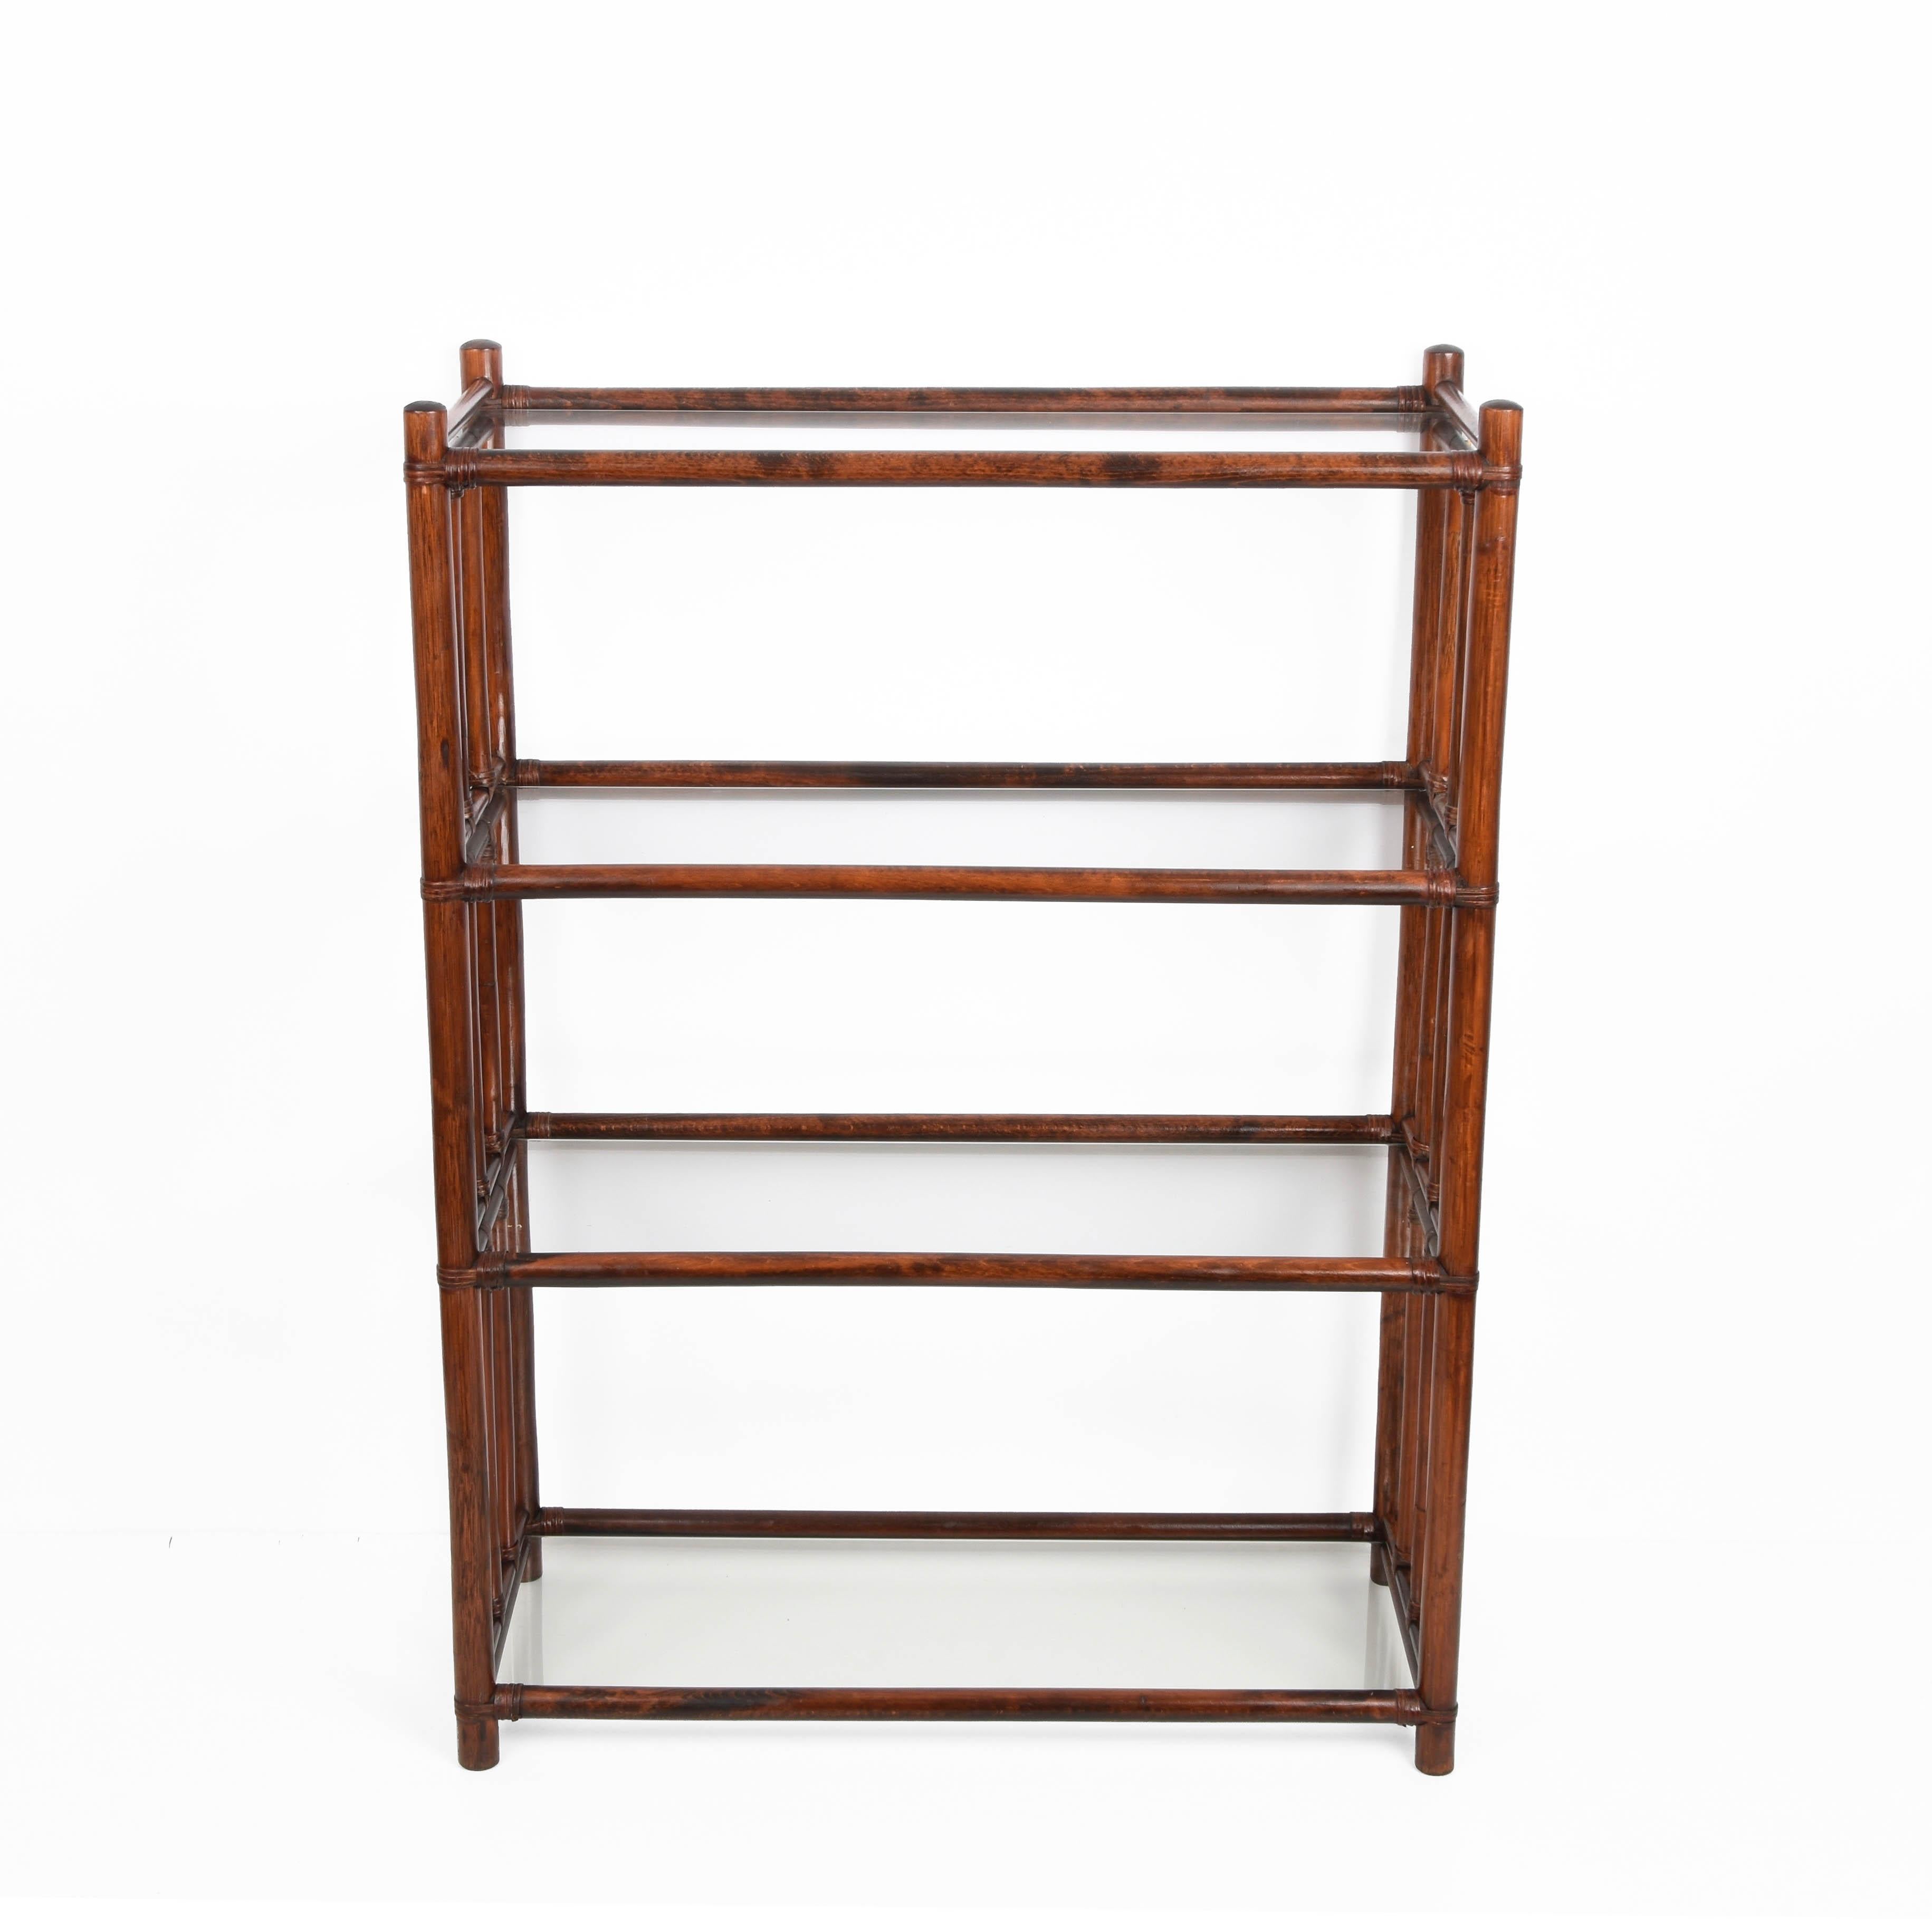 Amazing midcentury rattan bookcase with four crystal glass shelves. This amazing bookcase was produced in Italy during 1960s

This bookcase or étagère transmits elegant and delicate feelings. This piece is both solid, with meticulous eco-friendly